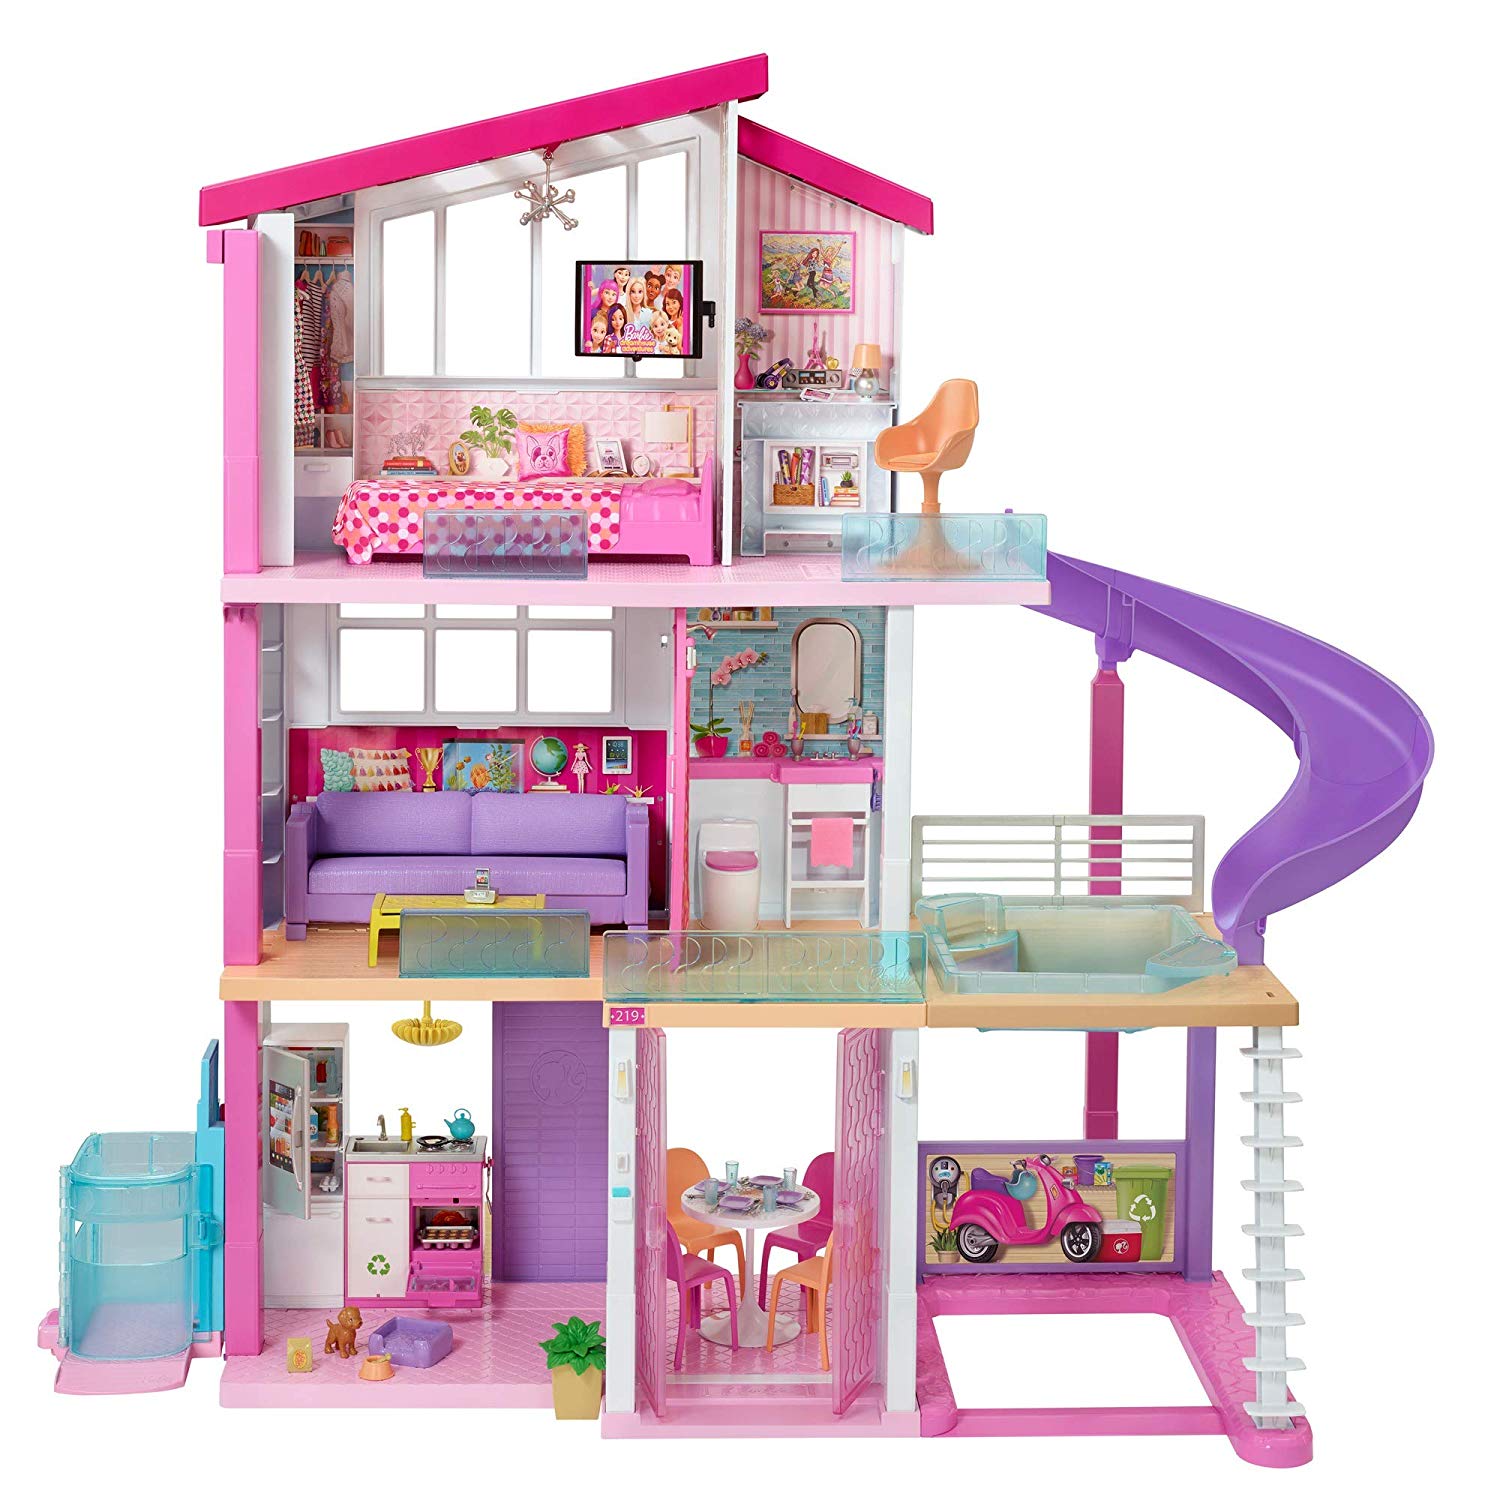 New Barbie Dream House doll house 2020 - YouLoveIt.com